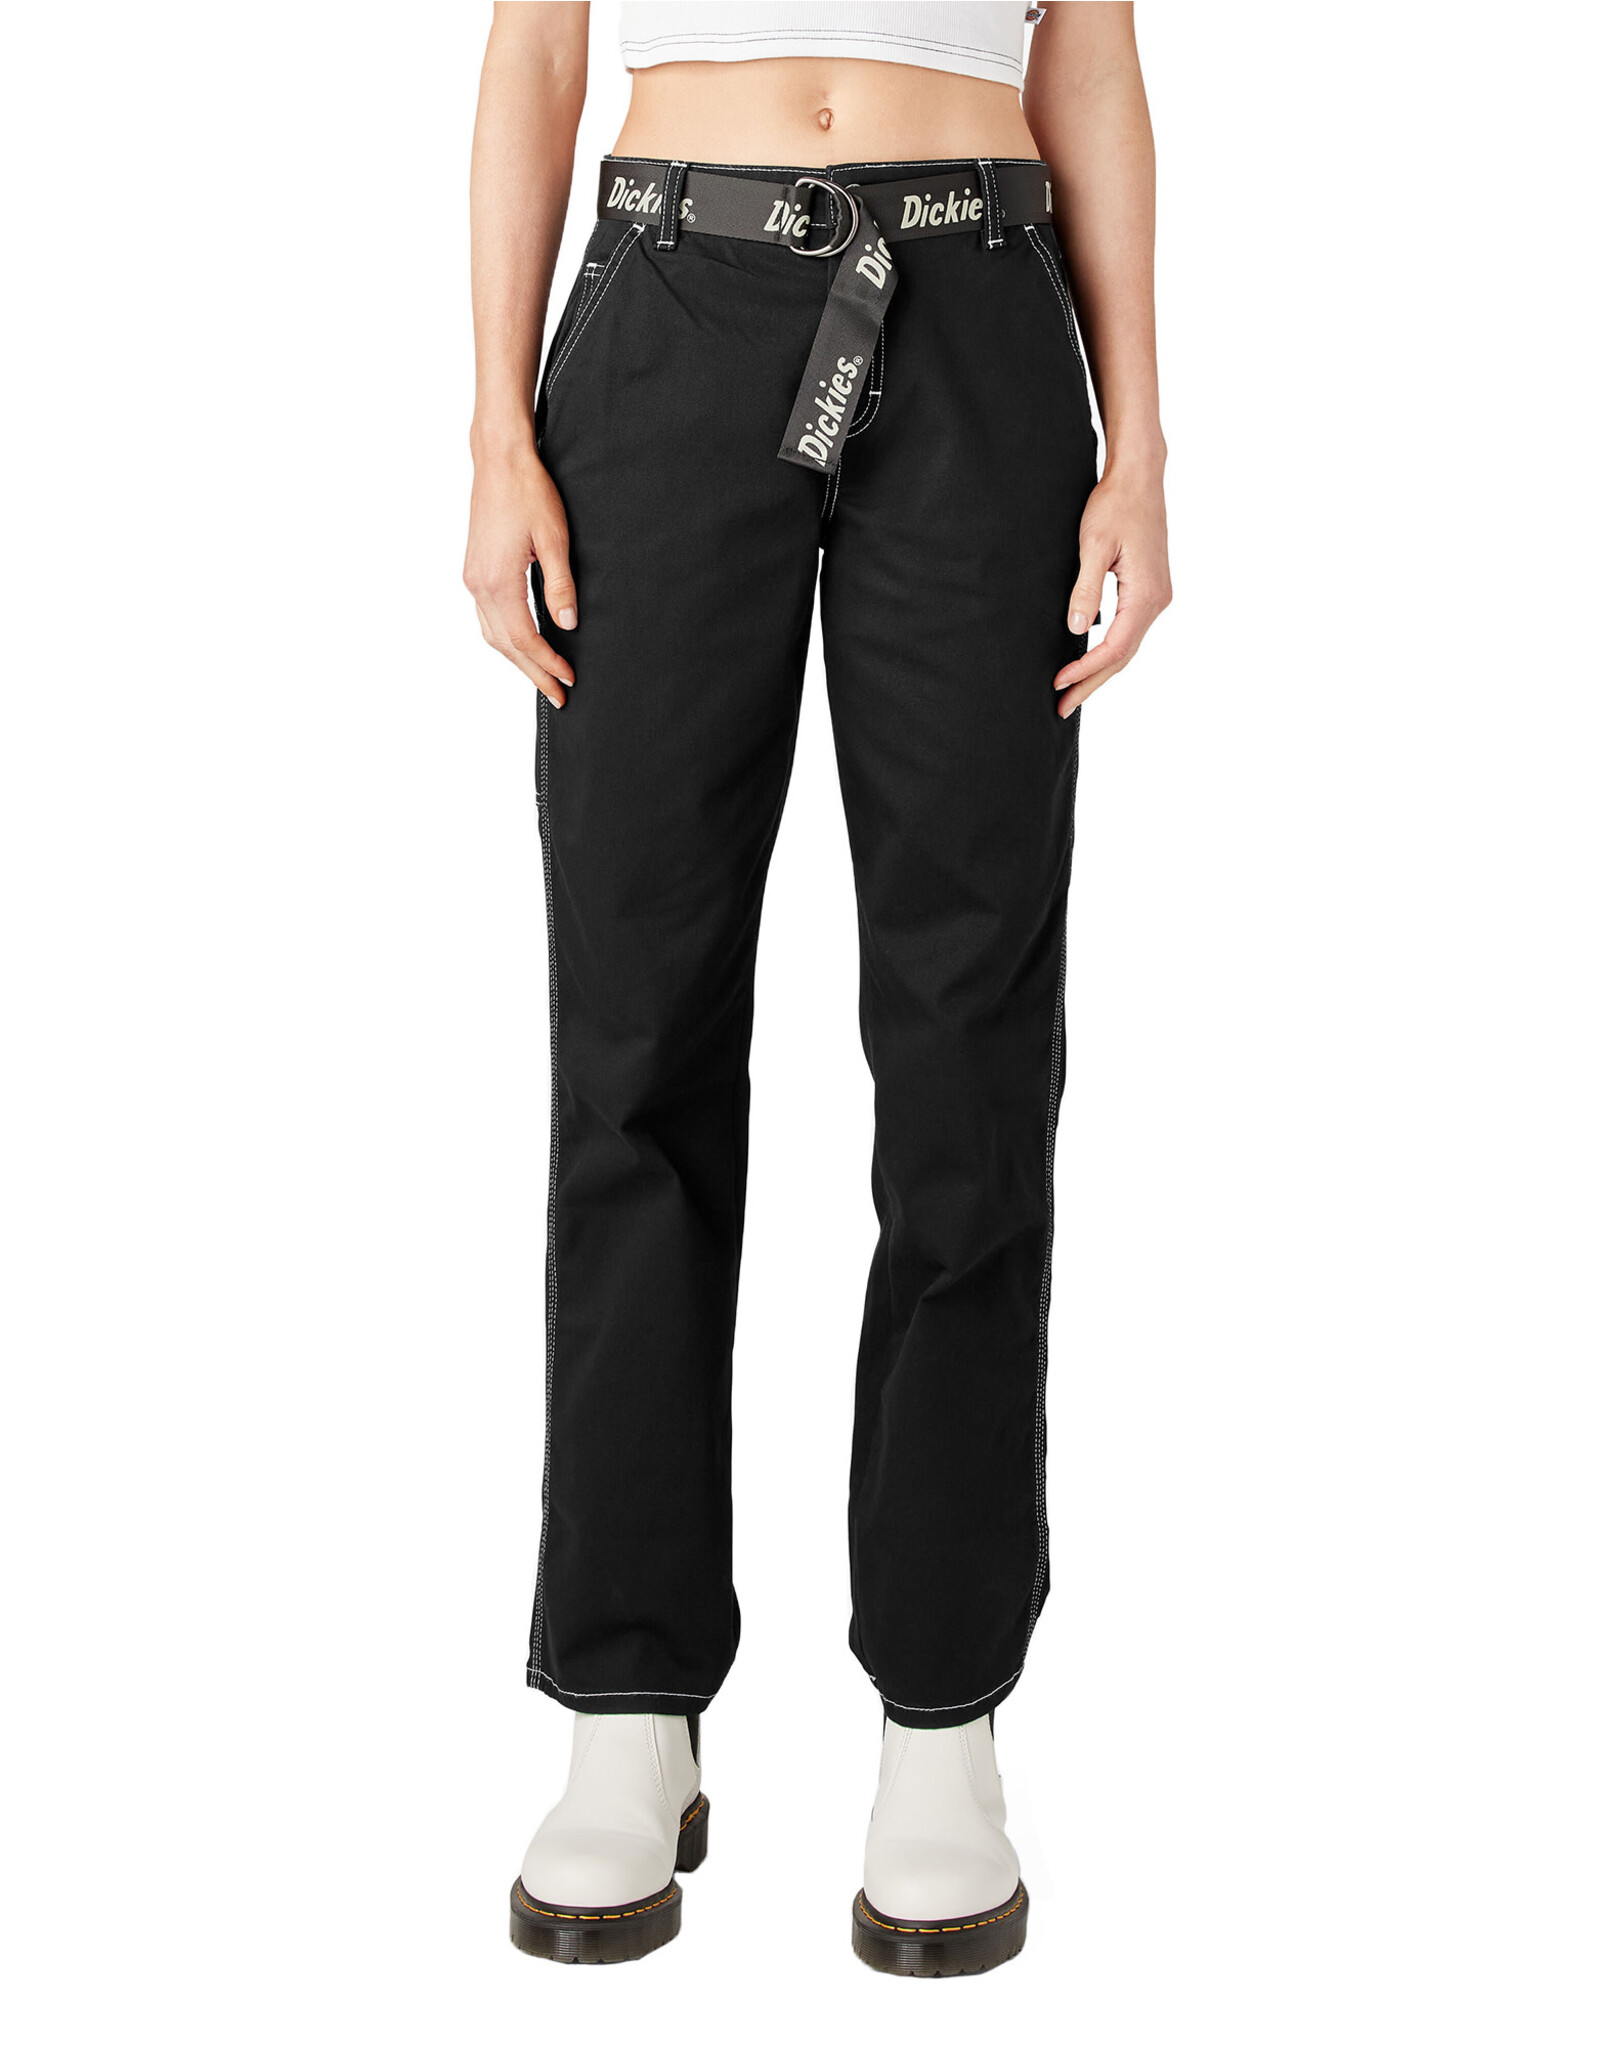 DICKIES Women's Relaxed Fit Carpenter Pants Black - FPR51BKX